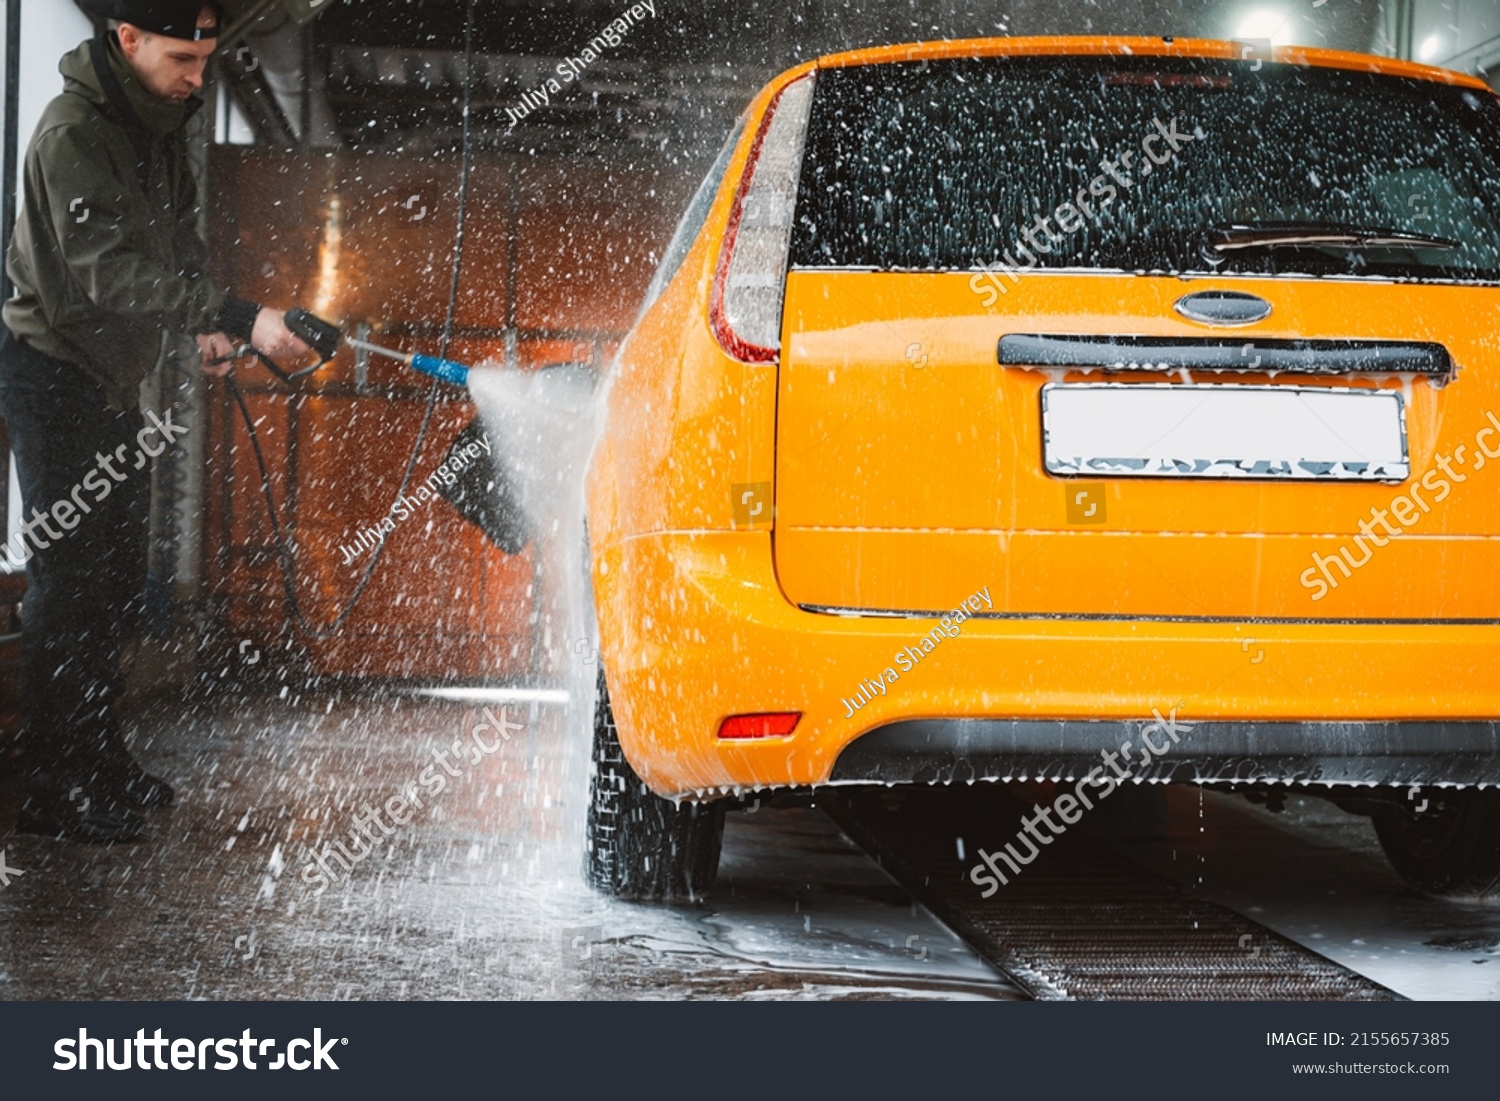 Washing a yellow car at a contactless self-service car wash. Washing a sedan car with foam and high-pressure water. Spring cleaning at the car wash. #2155657385